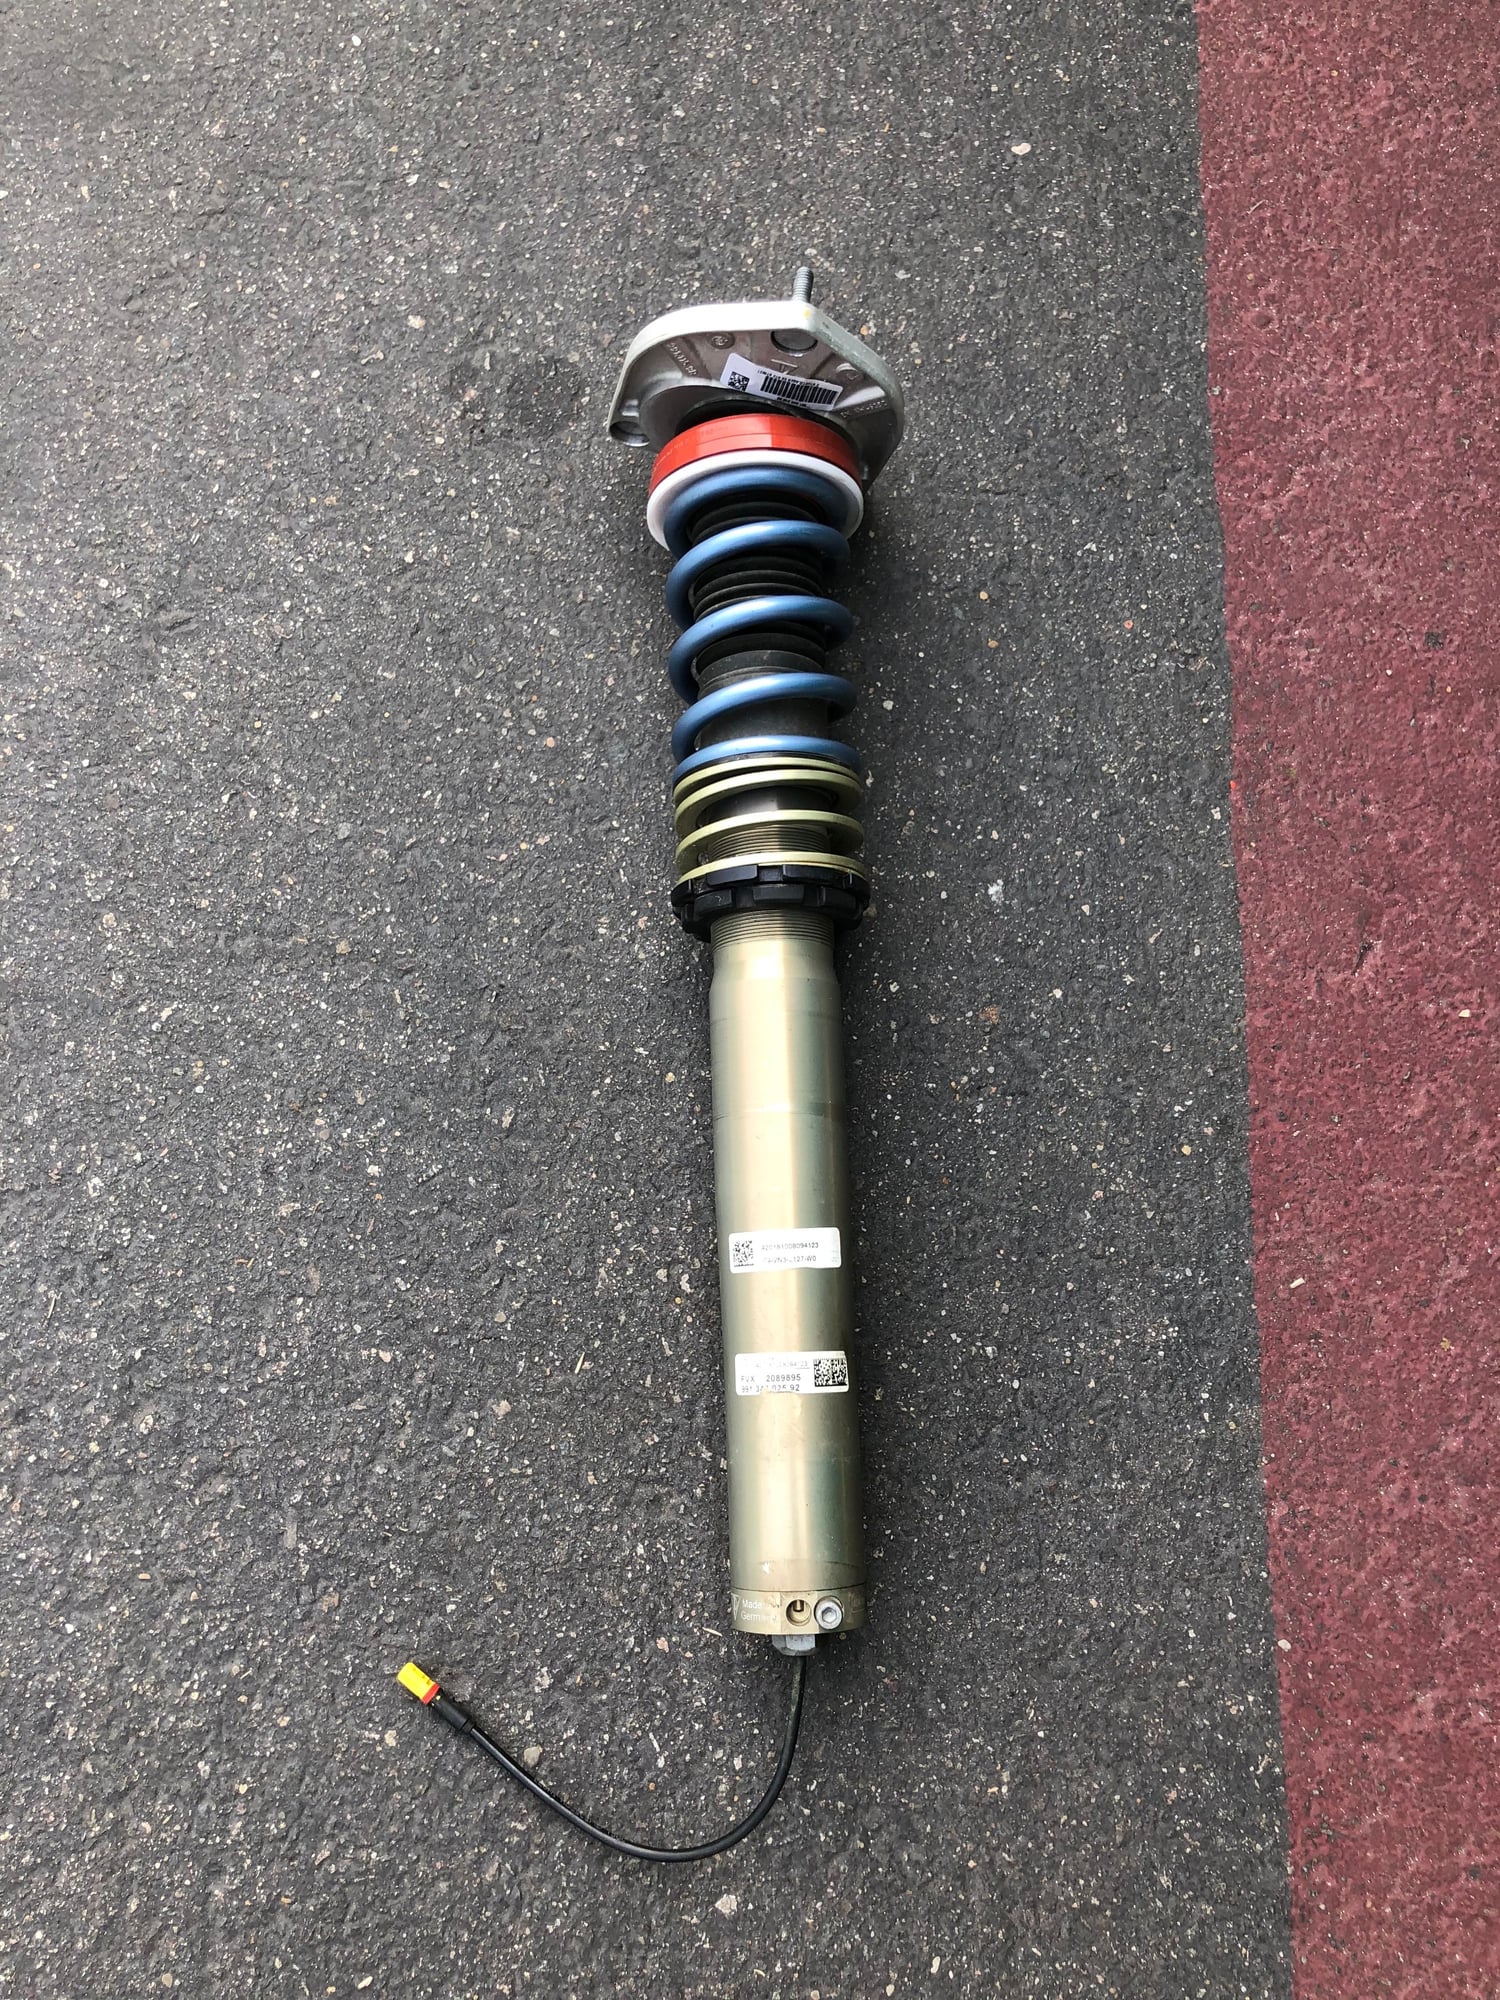 2018 Porsche GT3 - Front driver side coil-over with 80 N/mm springs - Steering/Suspension - $500 - Irvine, CA 92620, United States